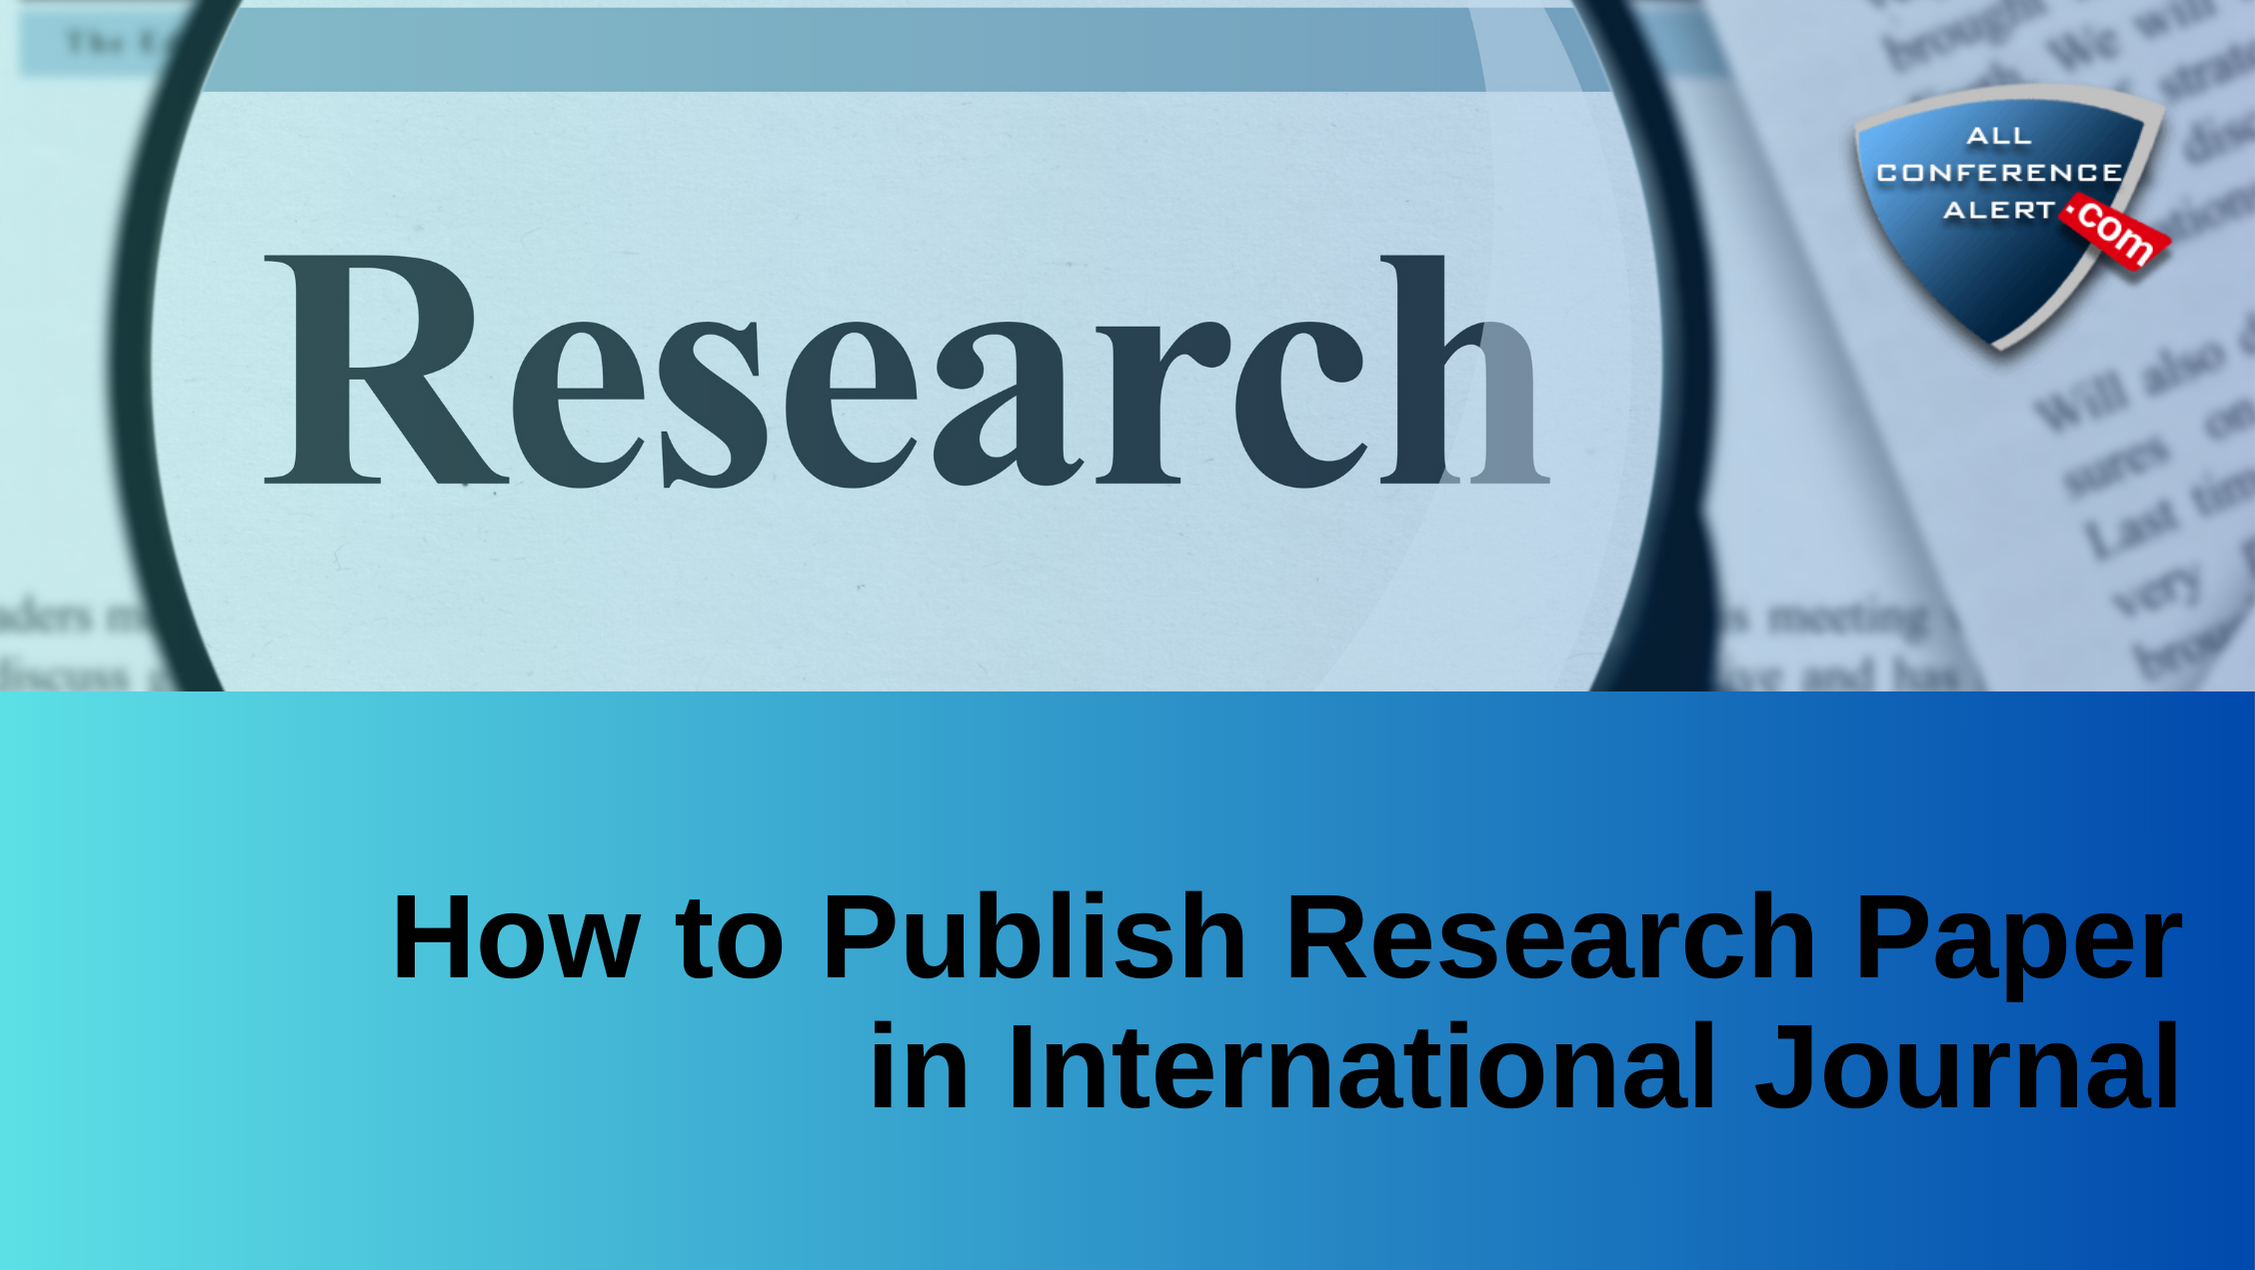 how to publish a research paper in international journal